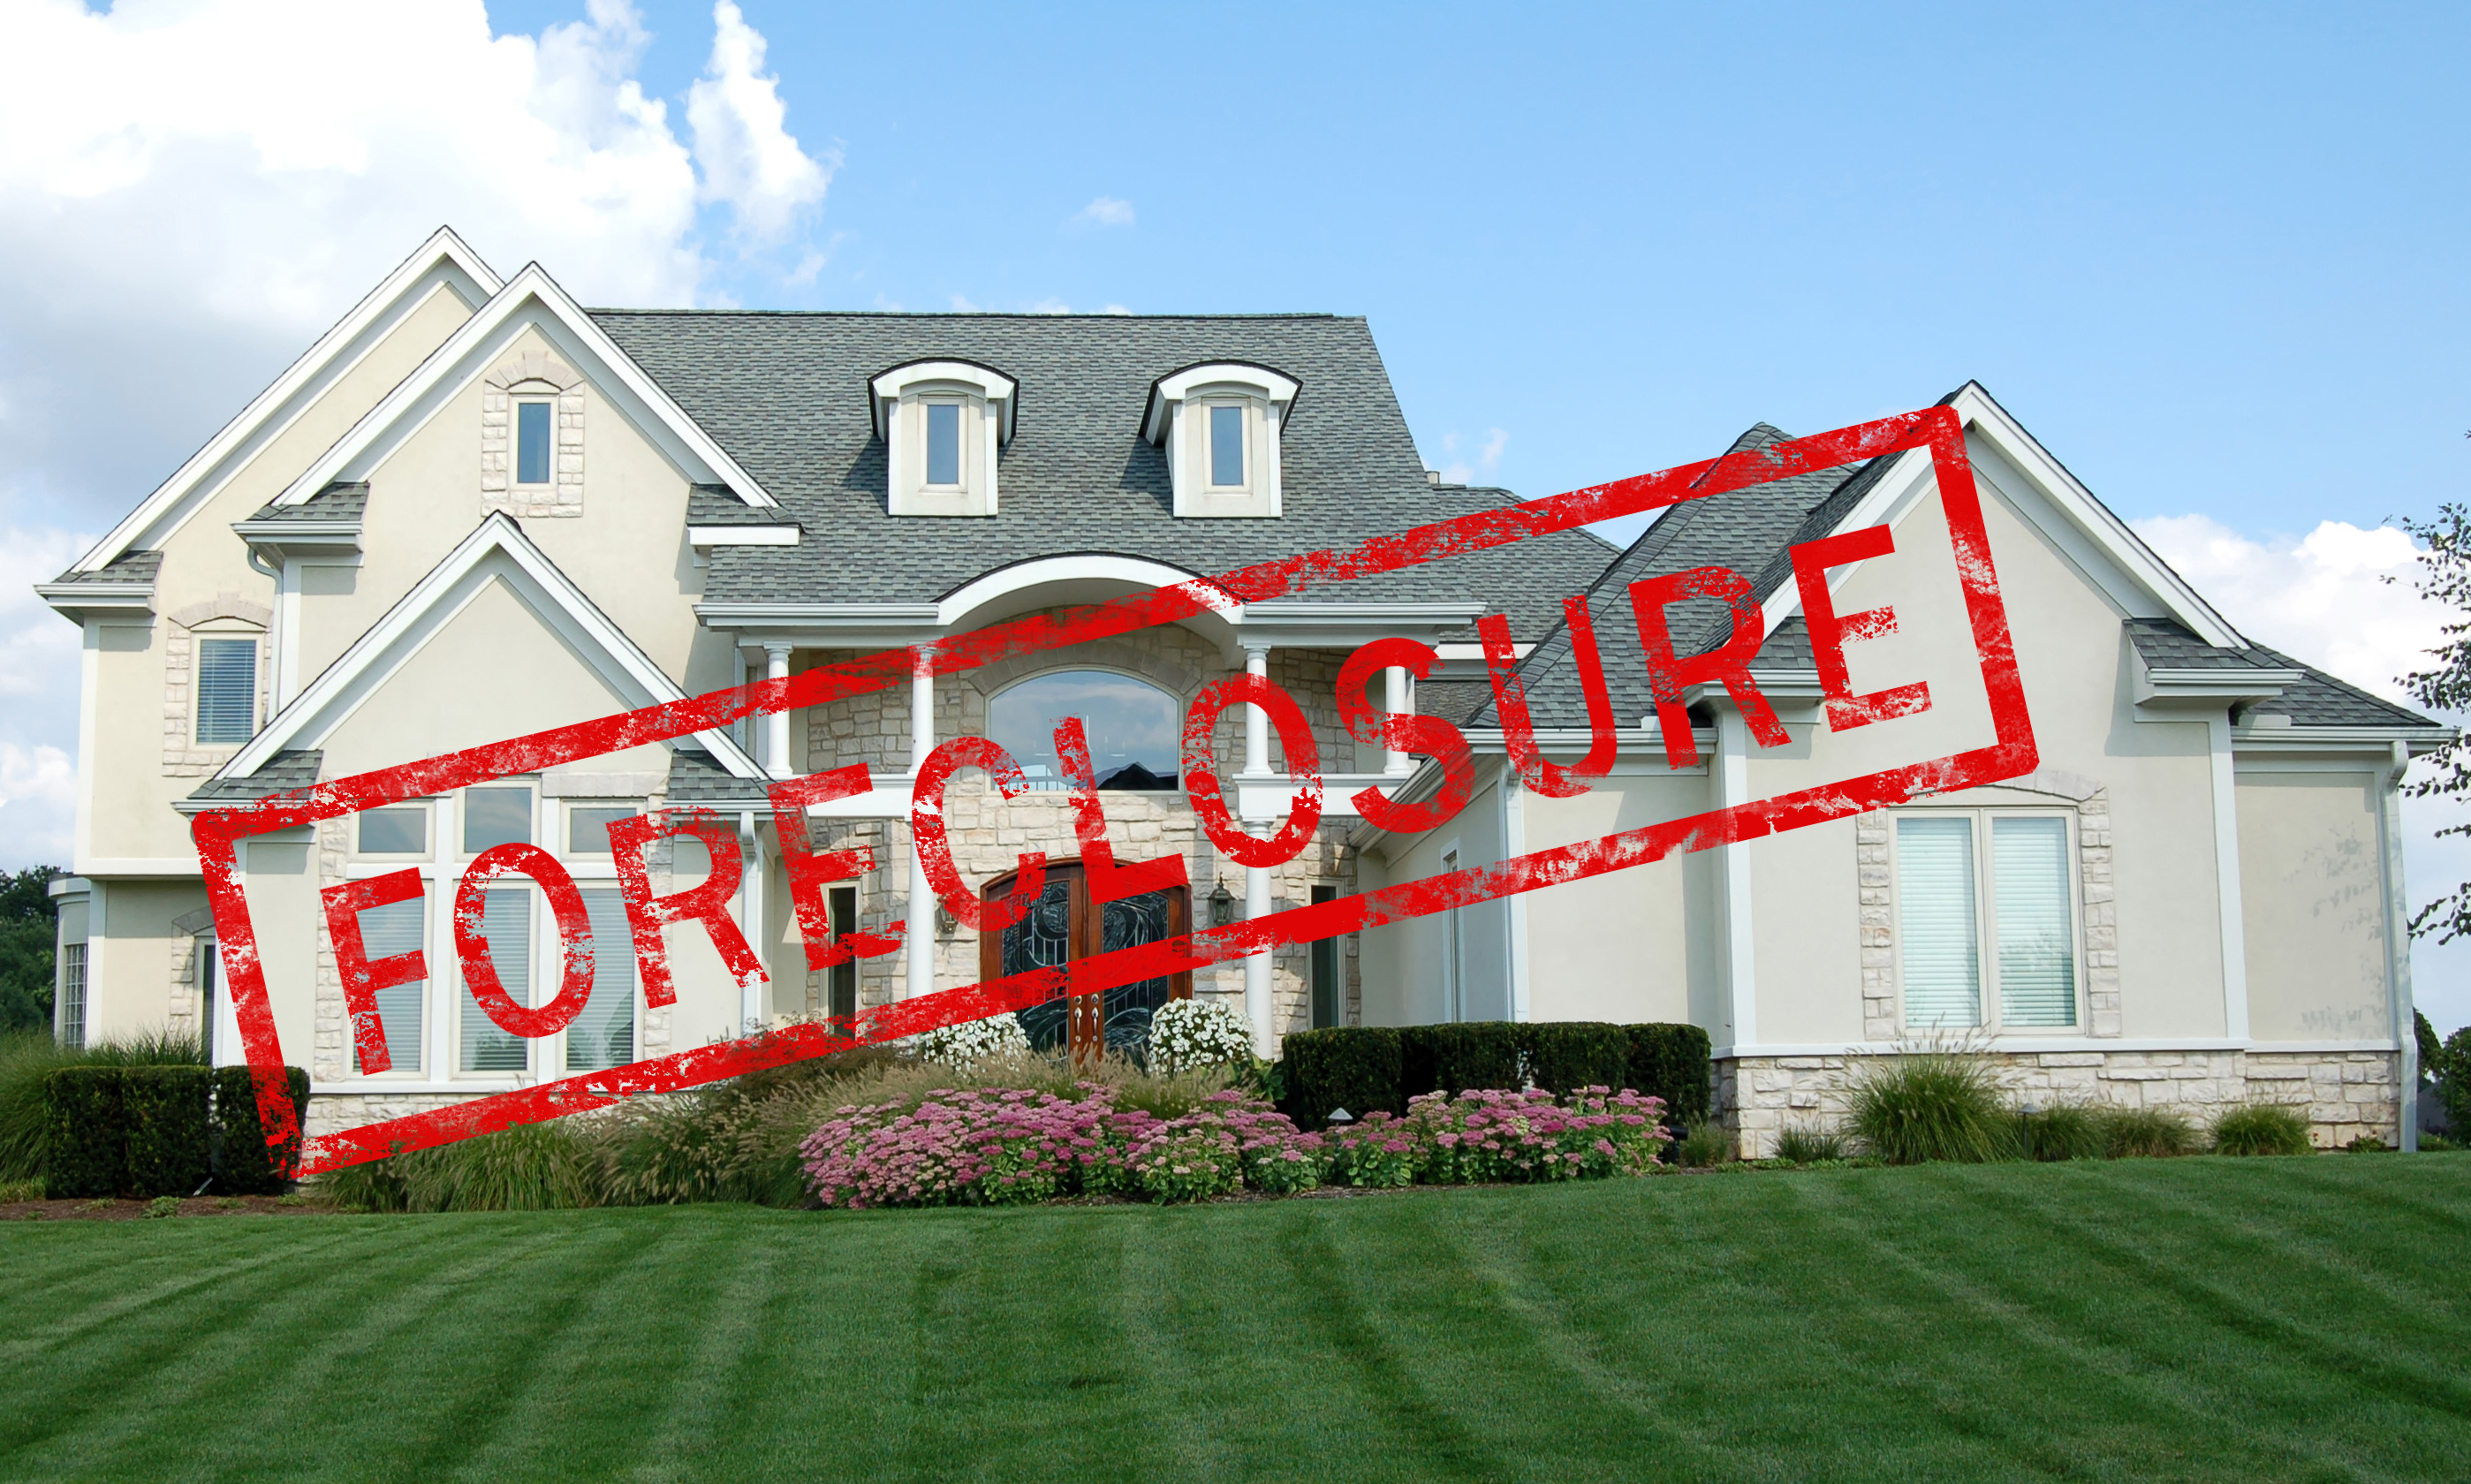 Call ASAP Appraisal Group to order appraisals pertaining to Polk foreclosures